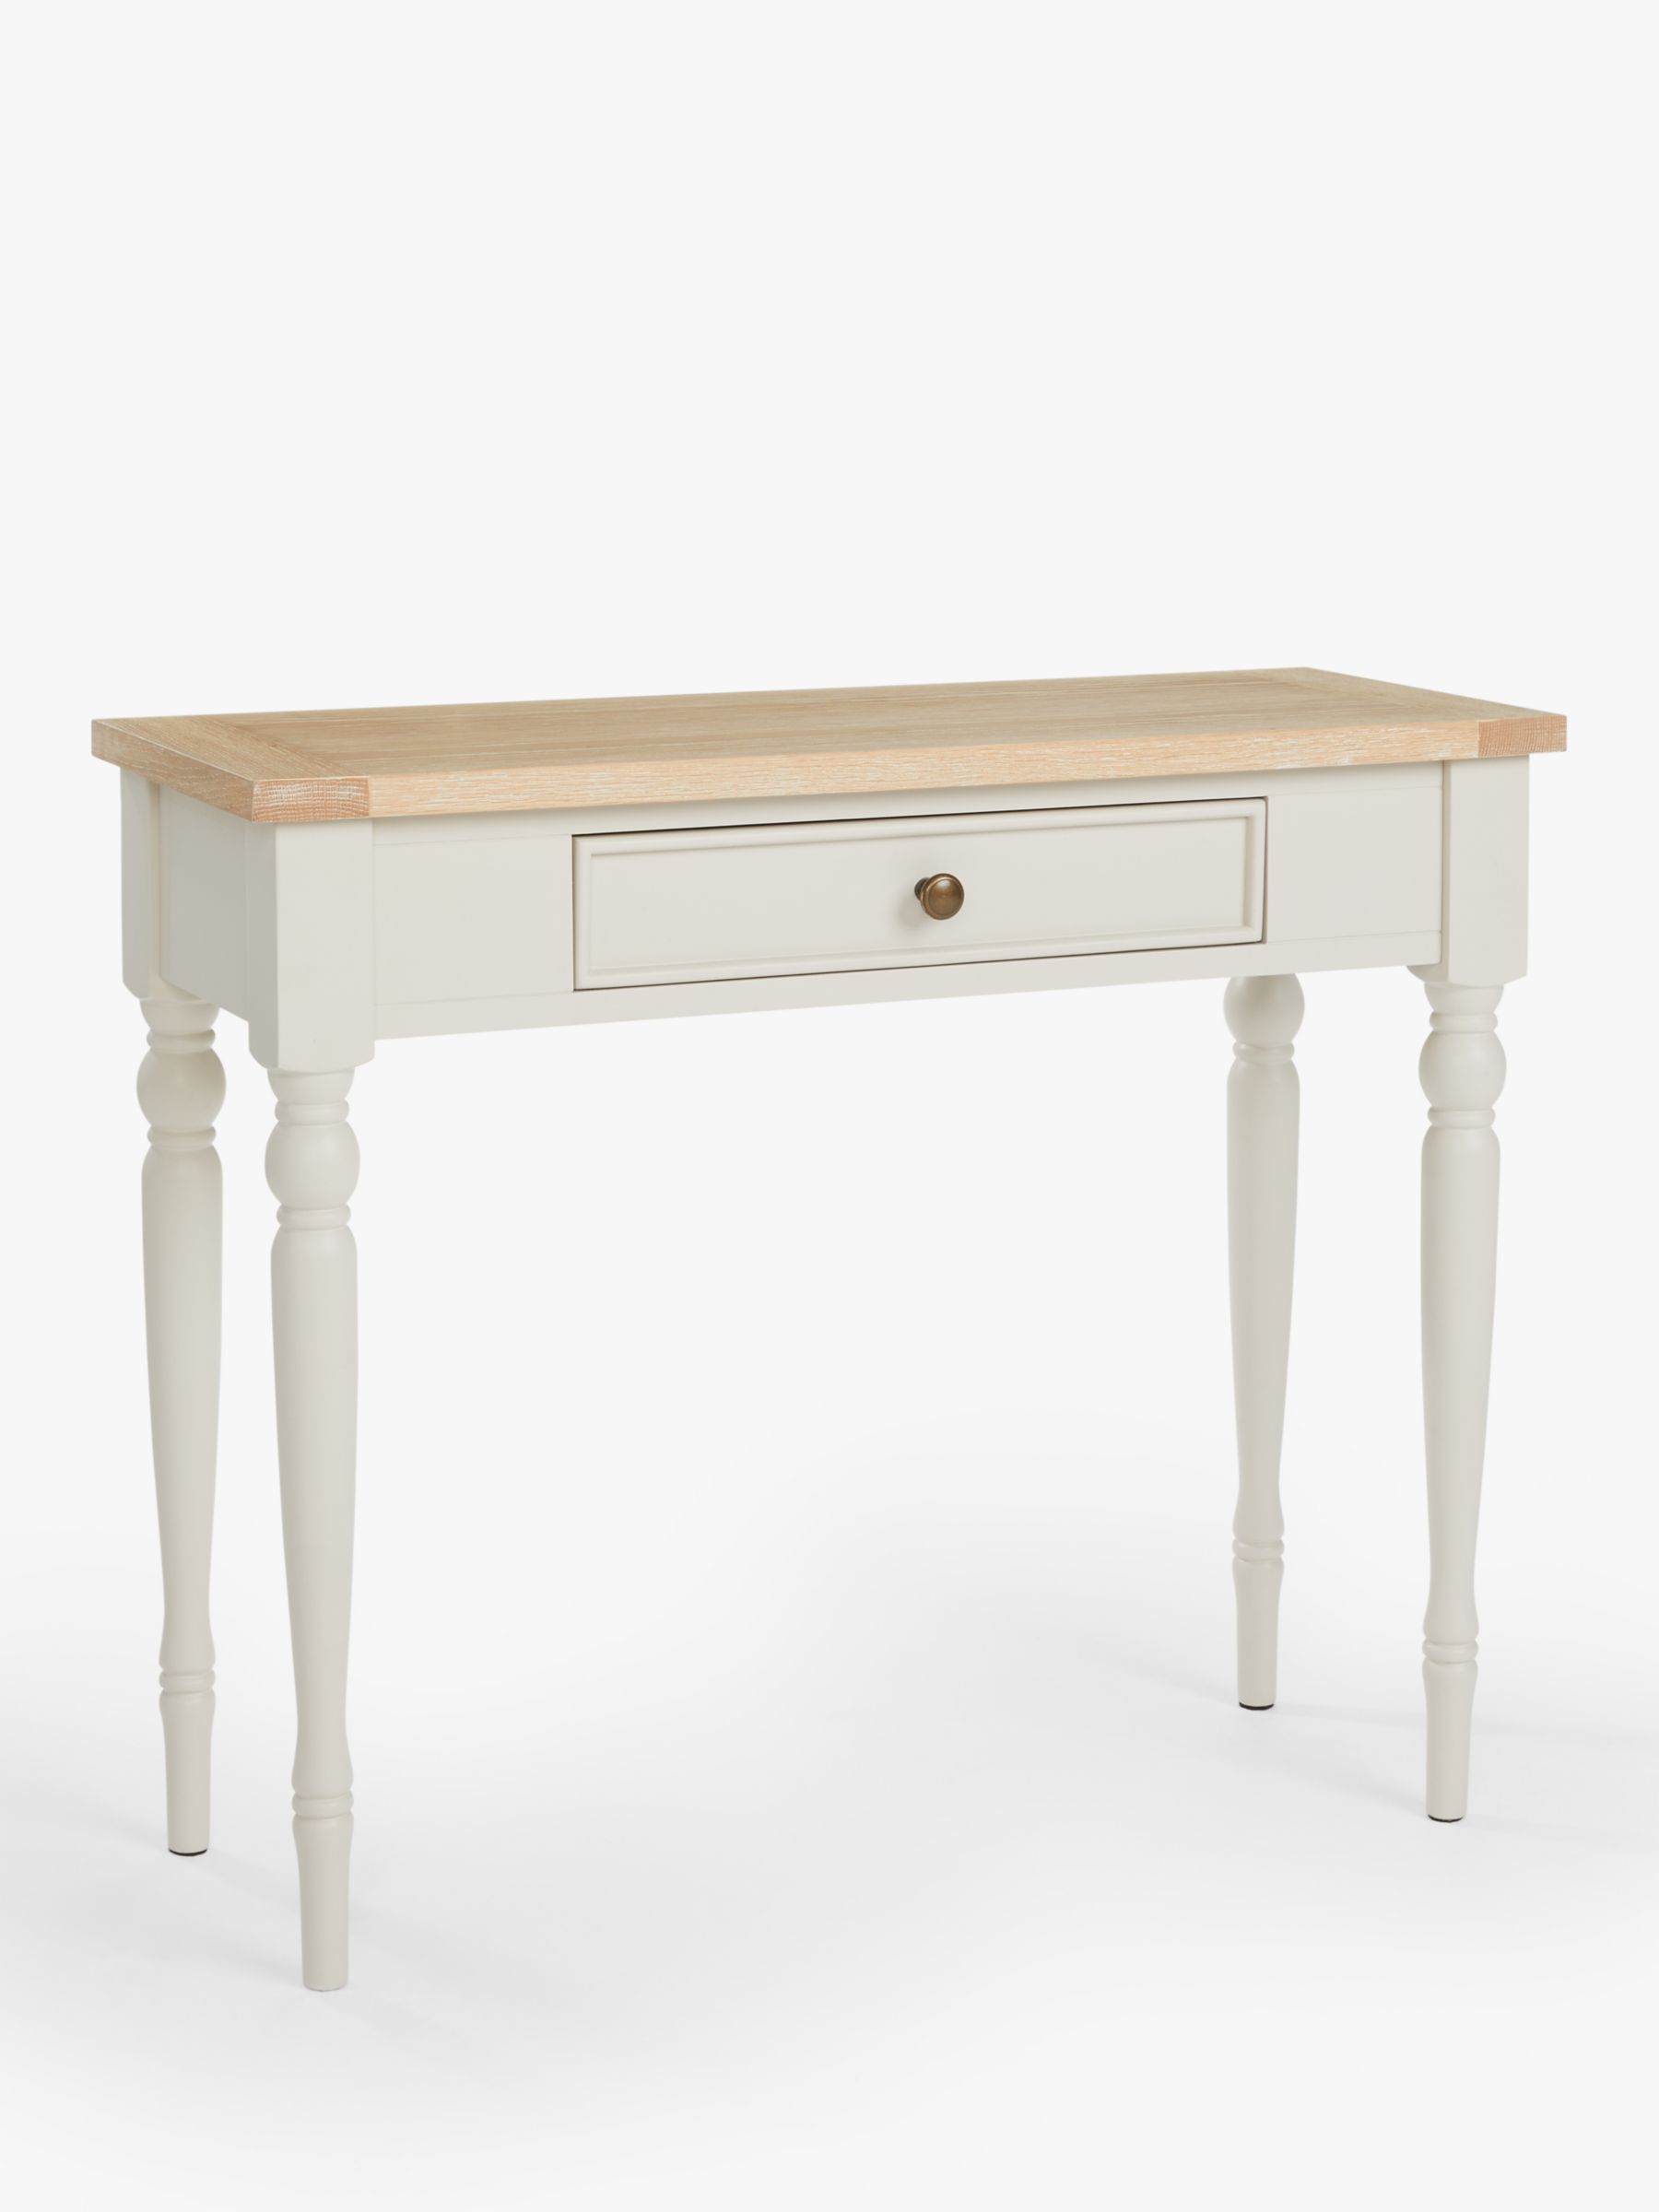 Photo of John lewis foxmoor compact console table fsc-certified -acacia wood- natural cream